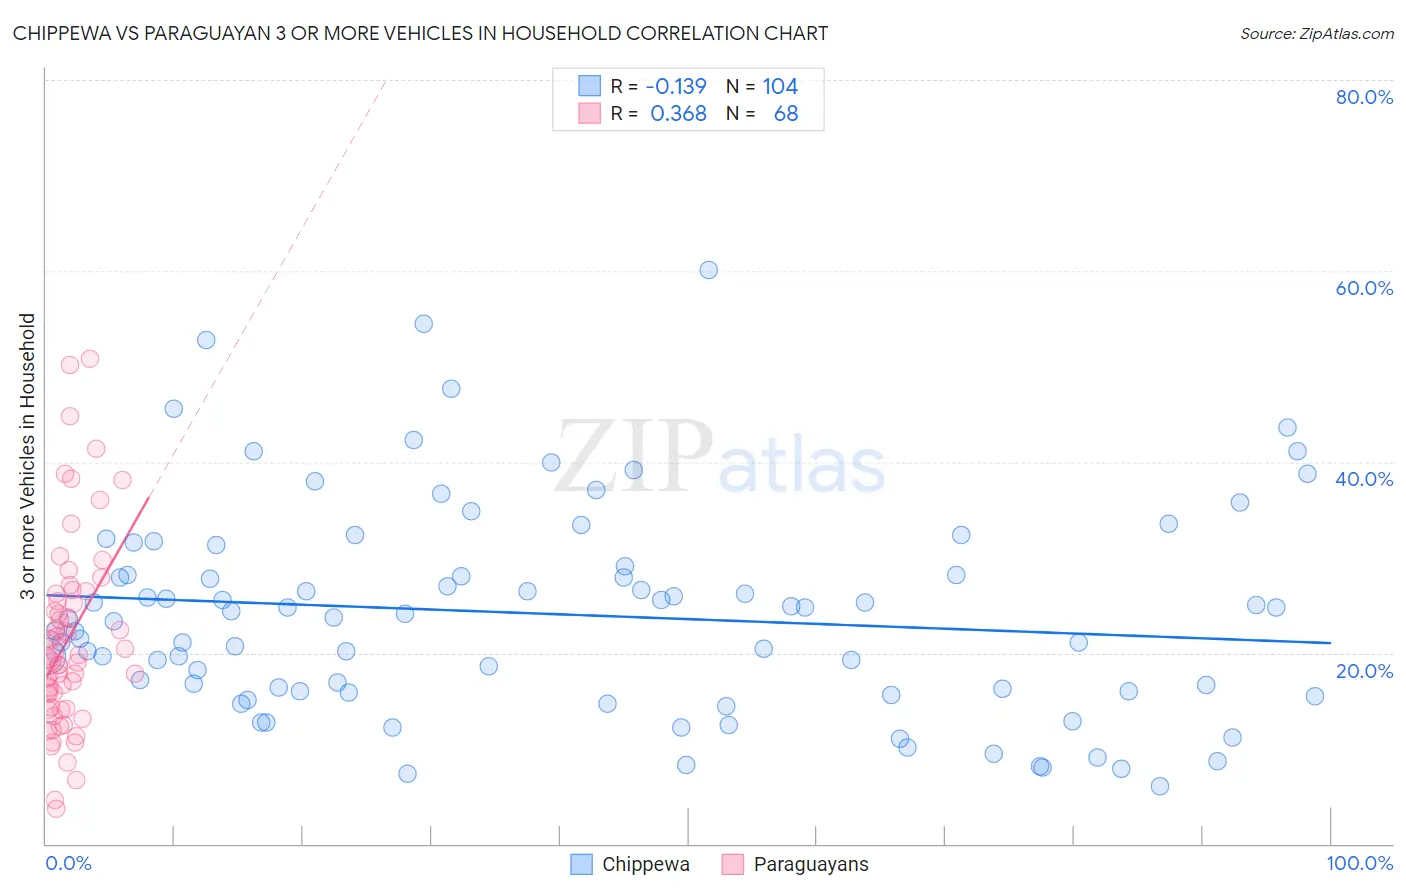 Chippewa vs Paraguayan 3 or more Vehicles in Household